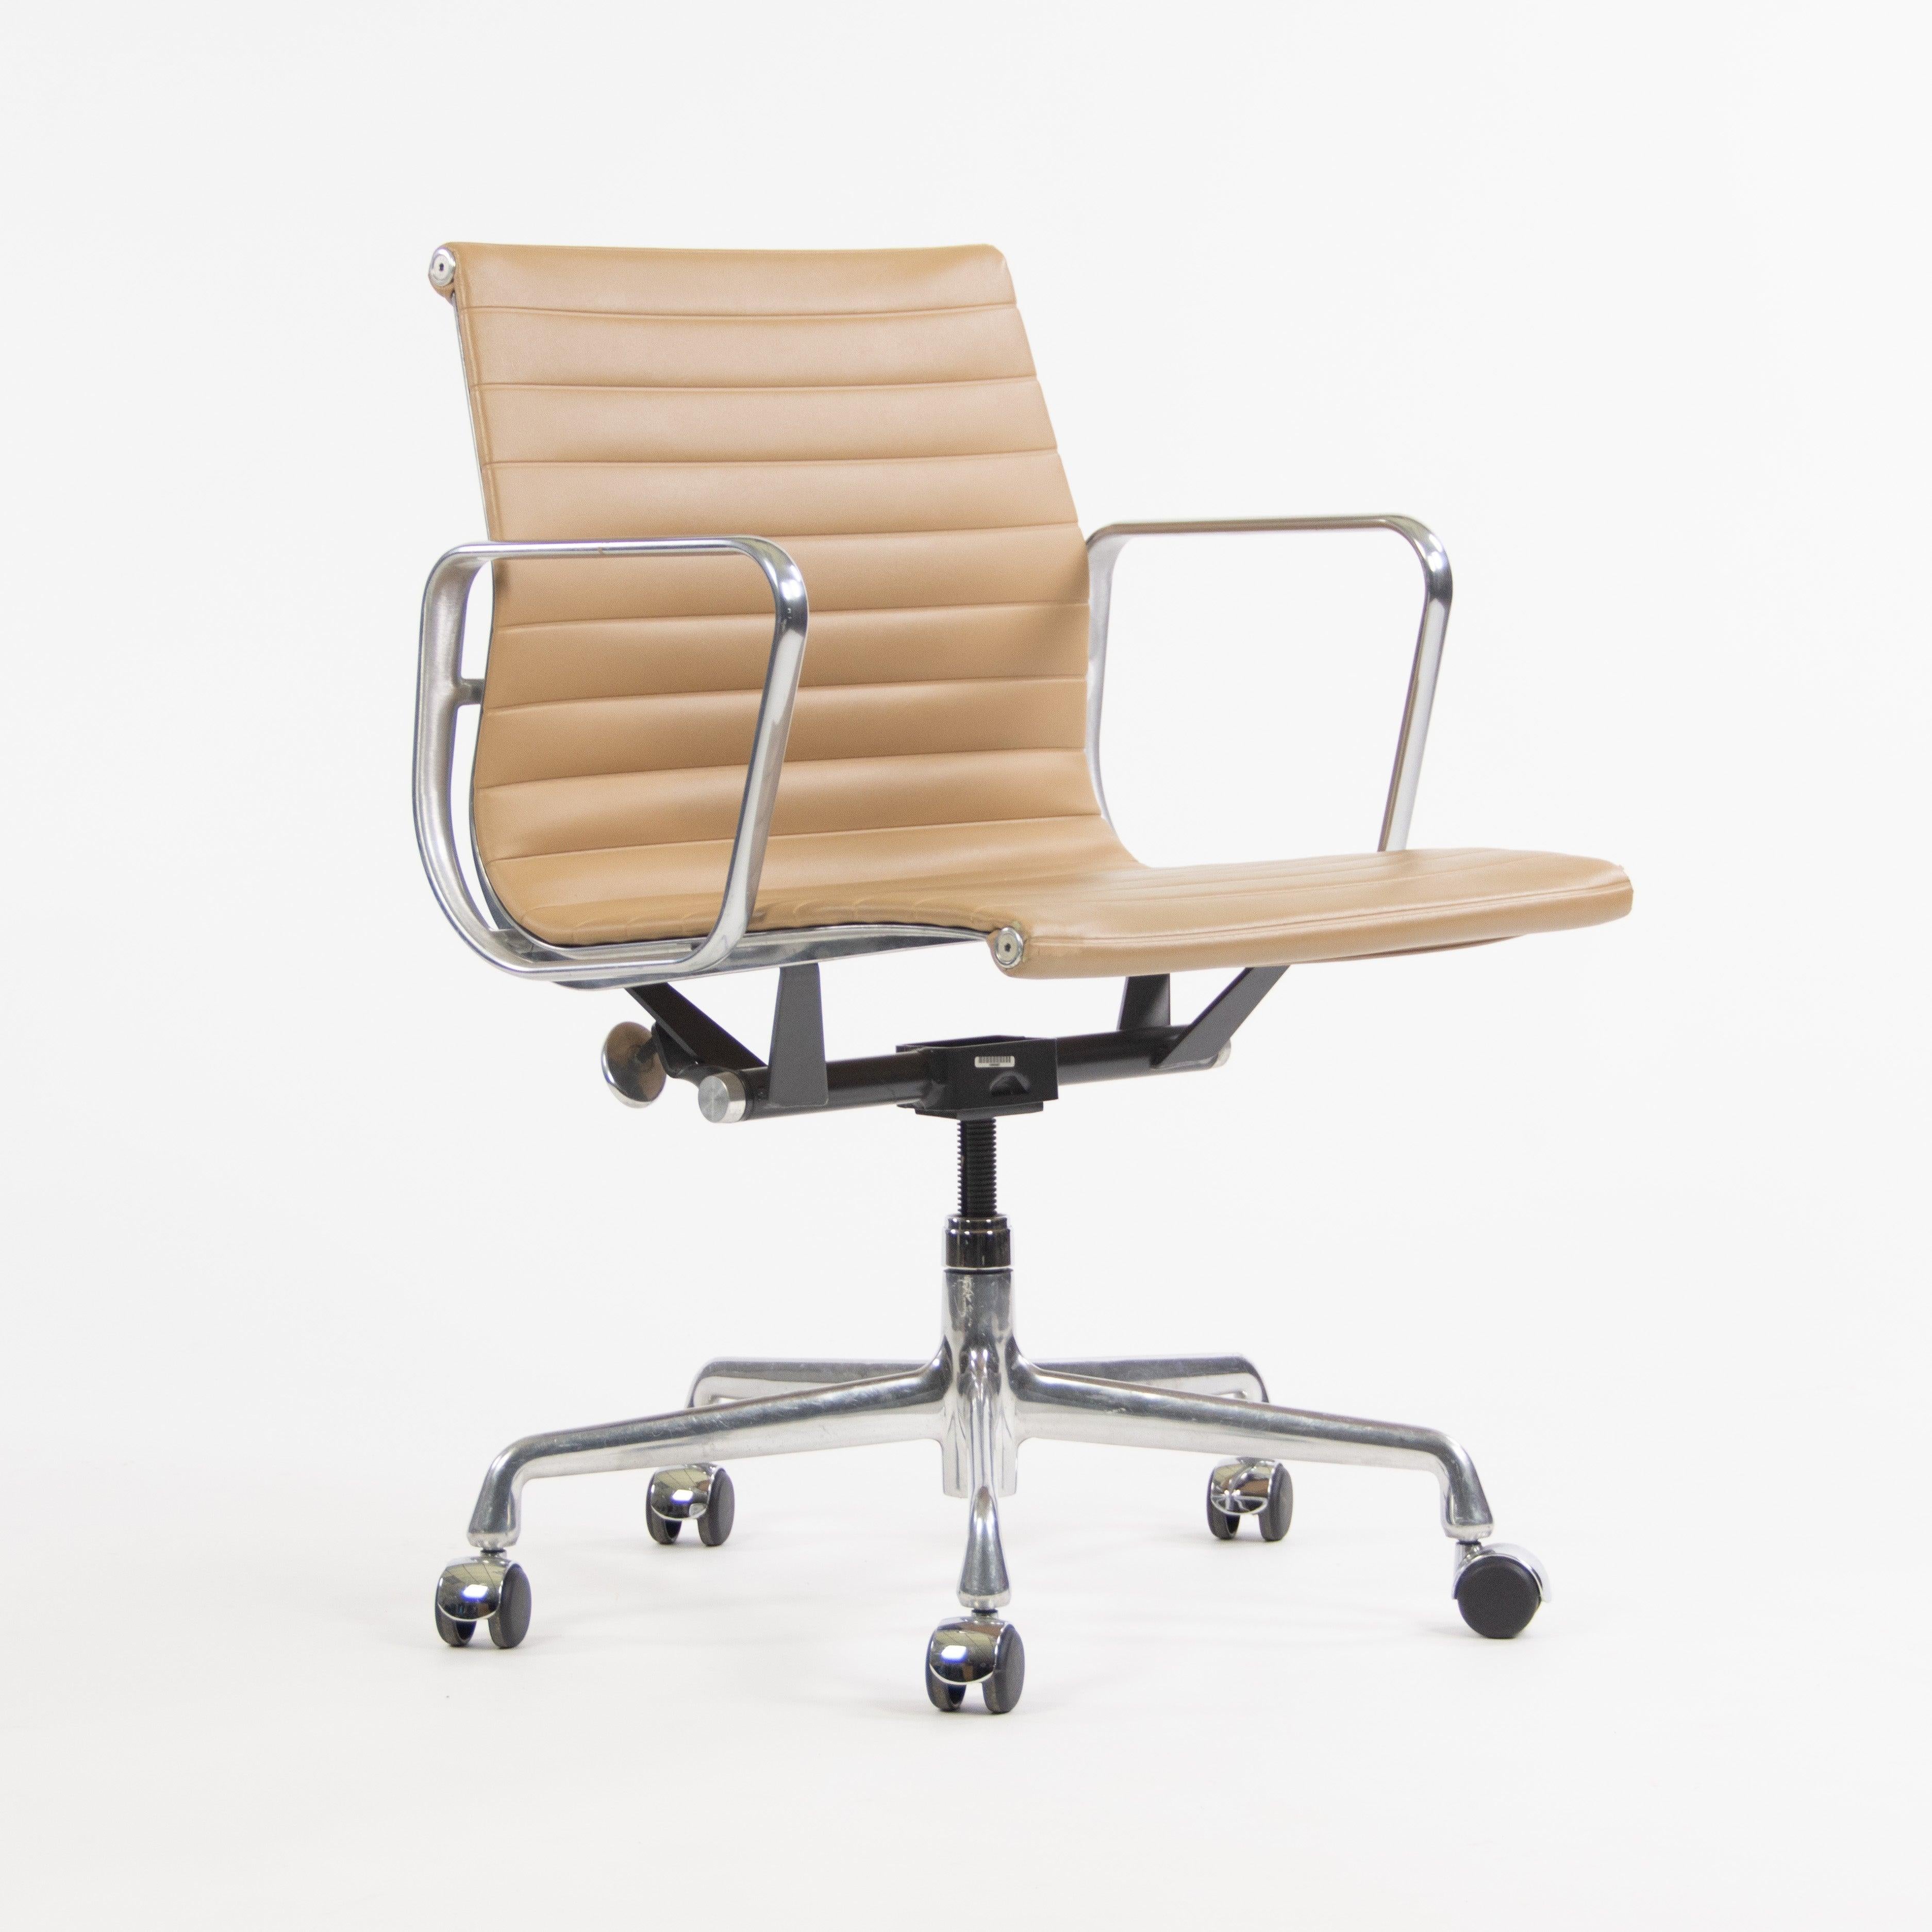 Contemporary 2008 Herman Miller Eames Aluminum Group Management Desk Chair in Tan Naugahyde For Sale